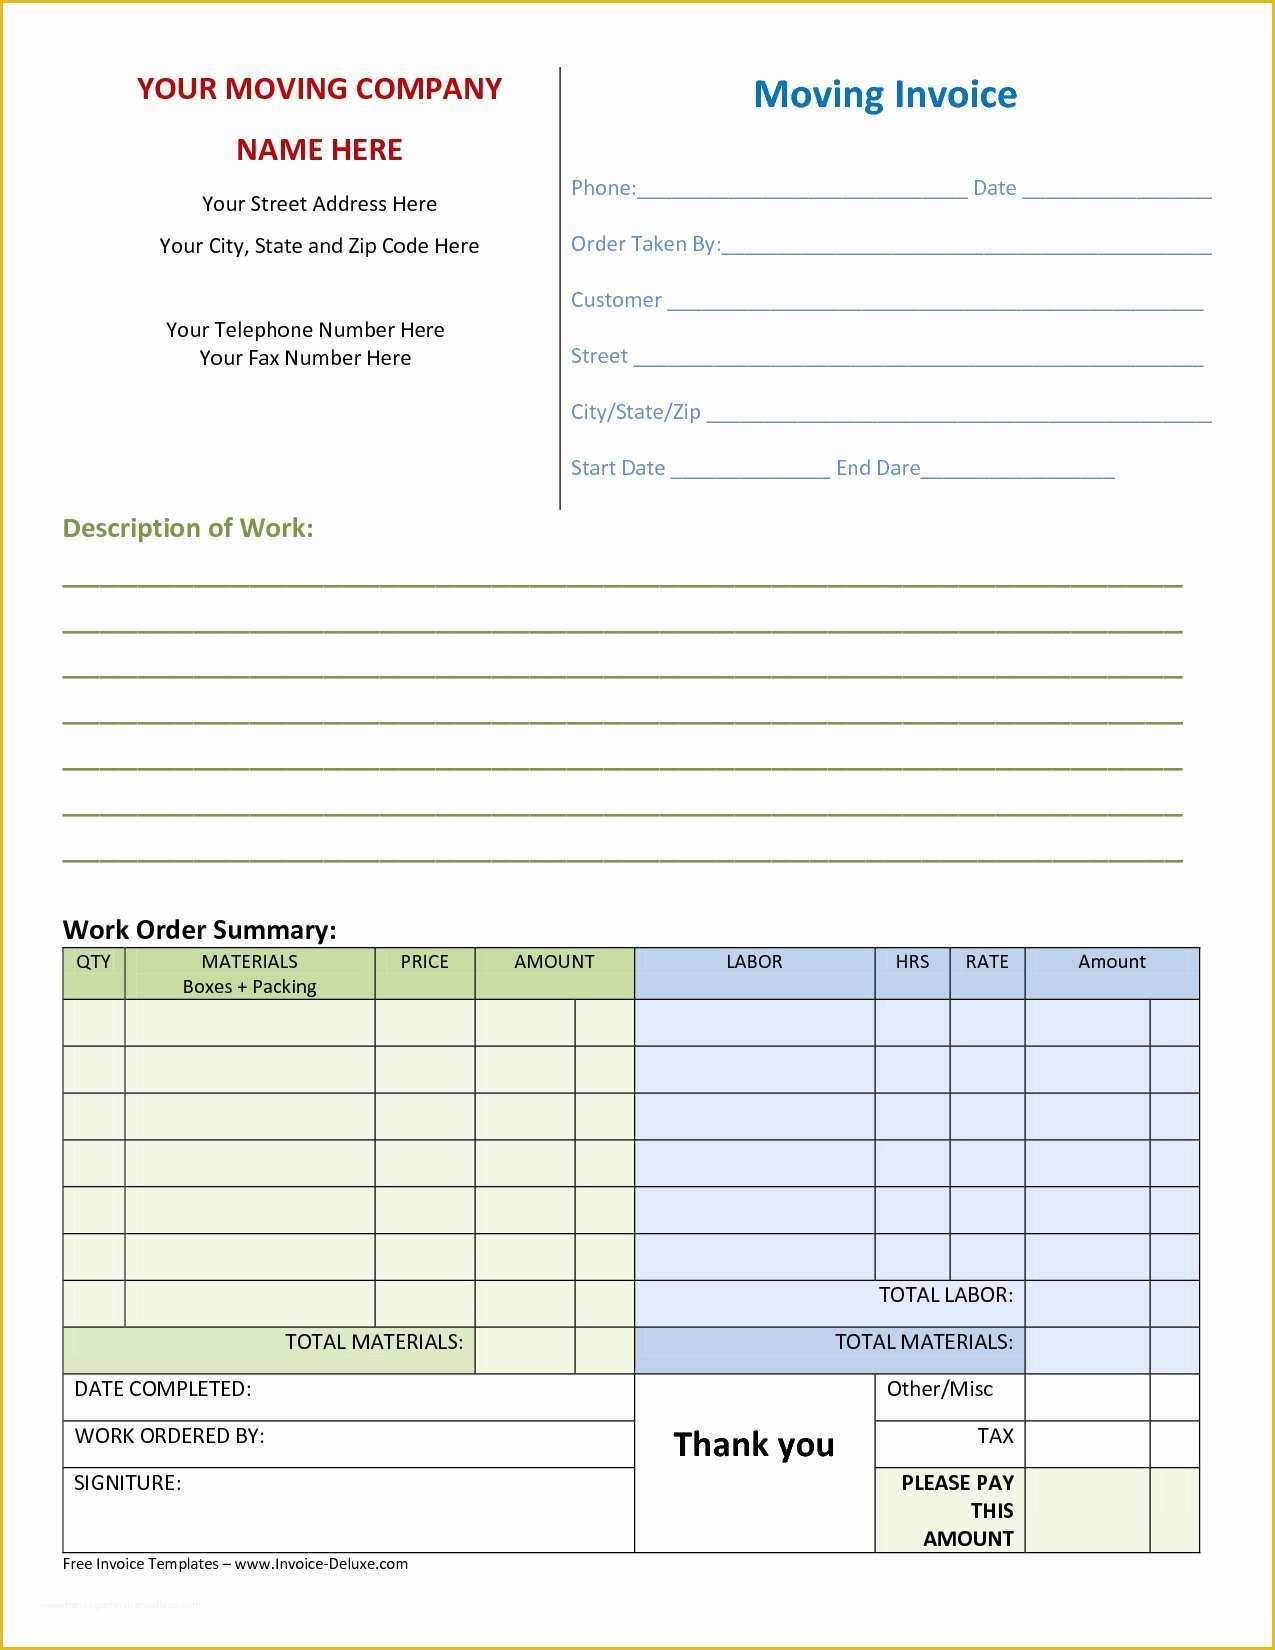 Free Invoice form Template Of Moving Invoice Template Invoice Template Ideas